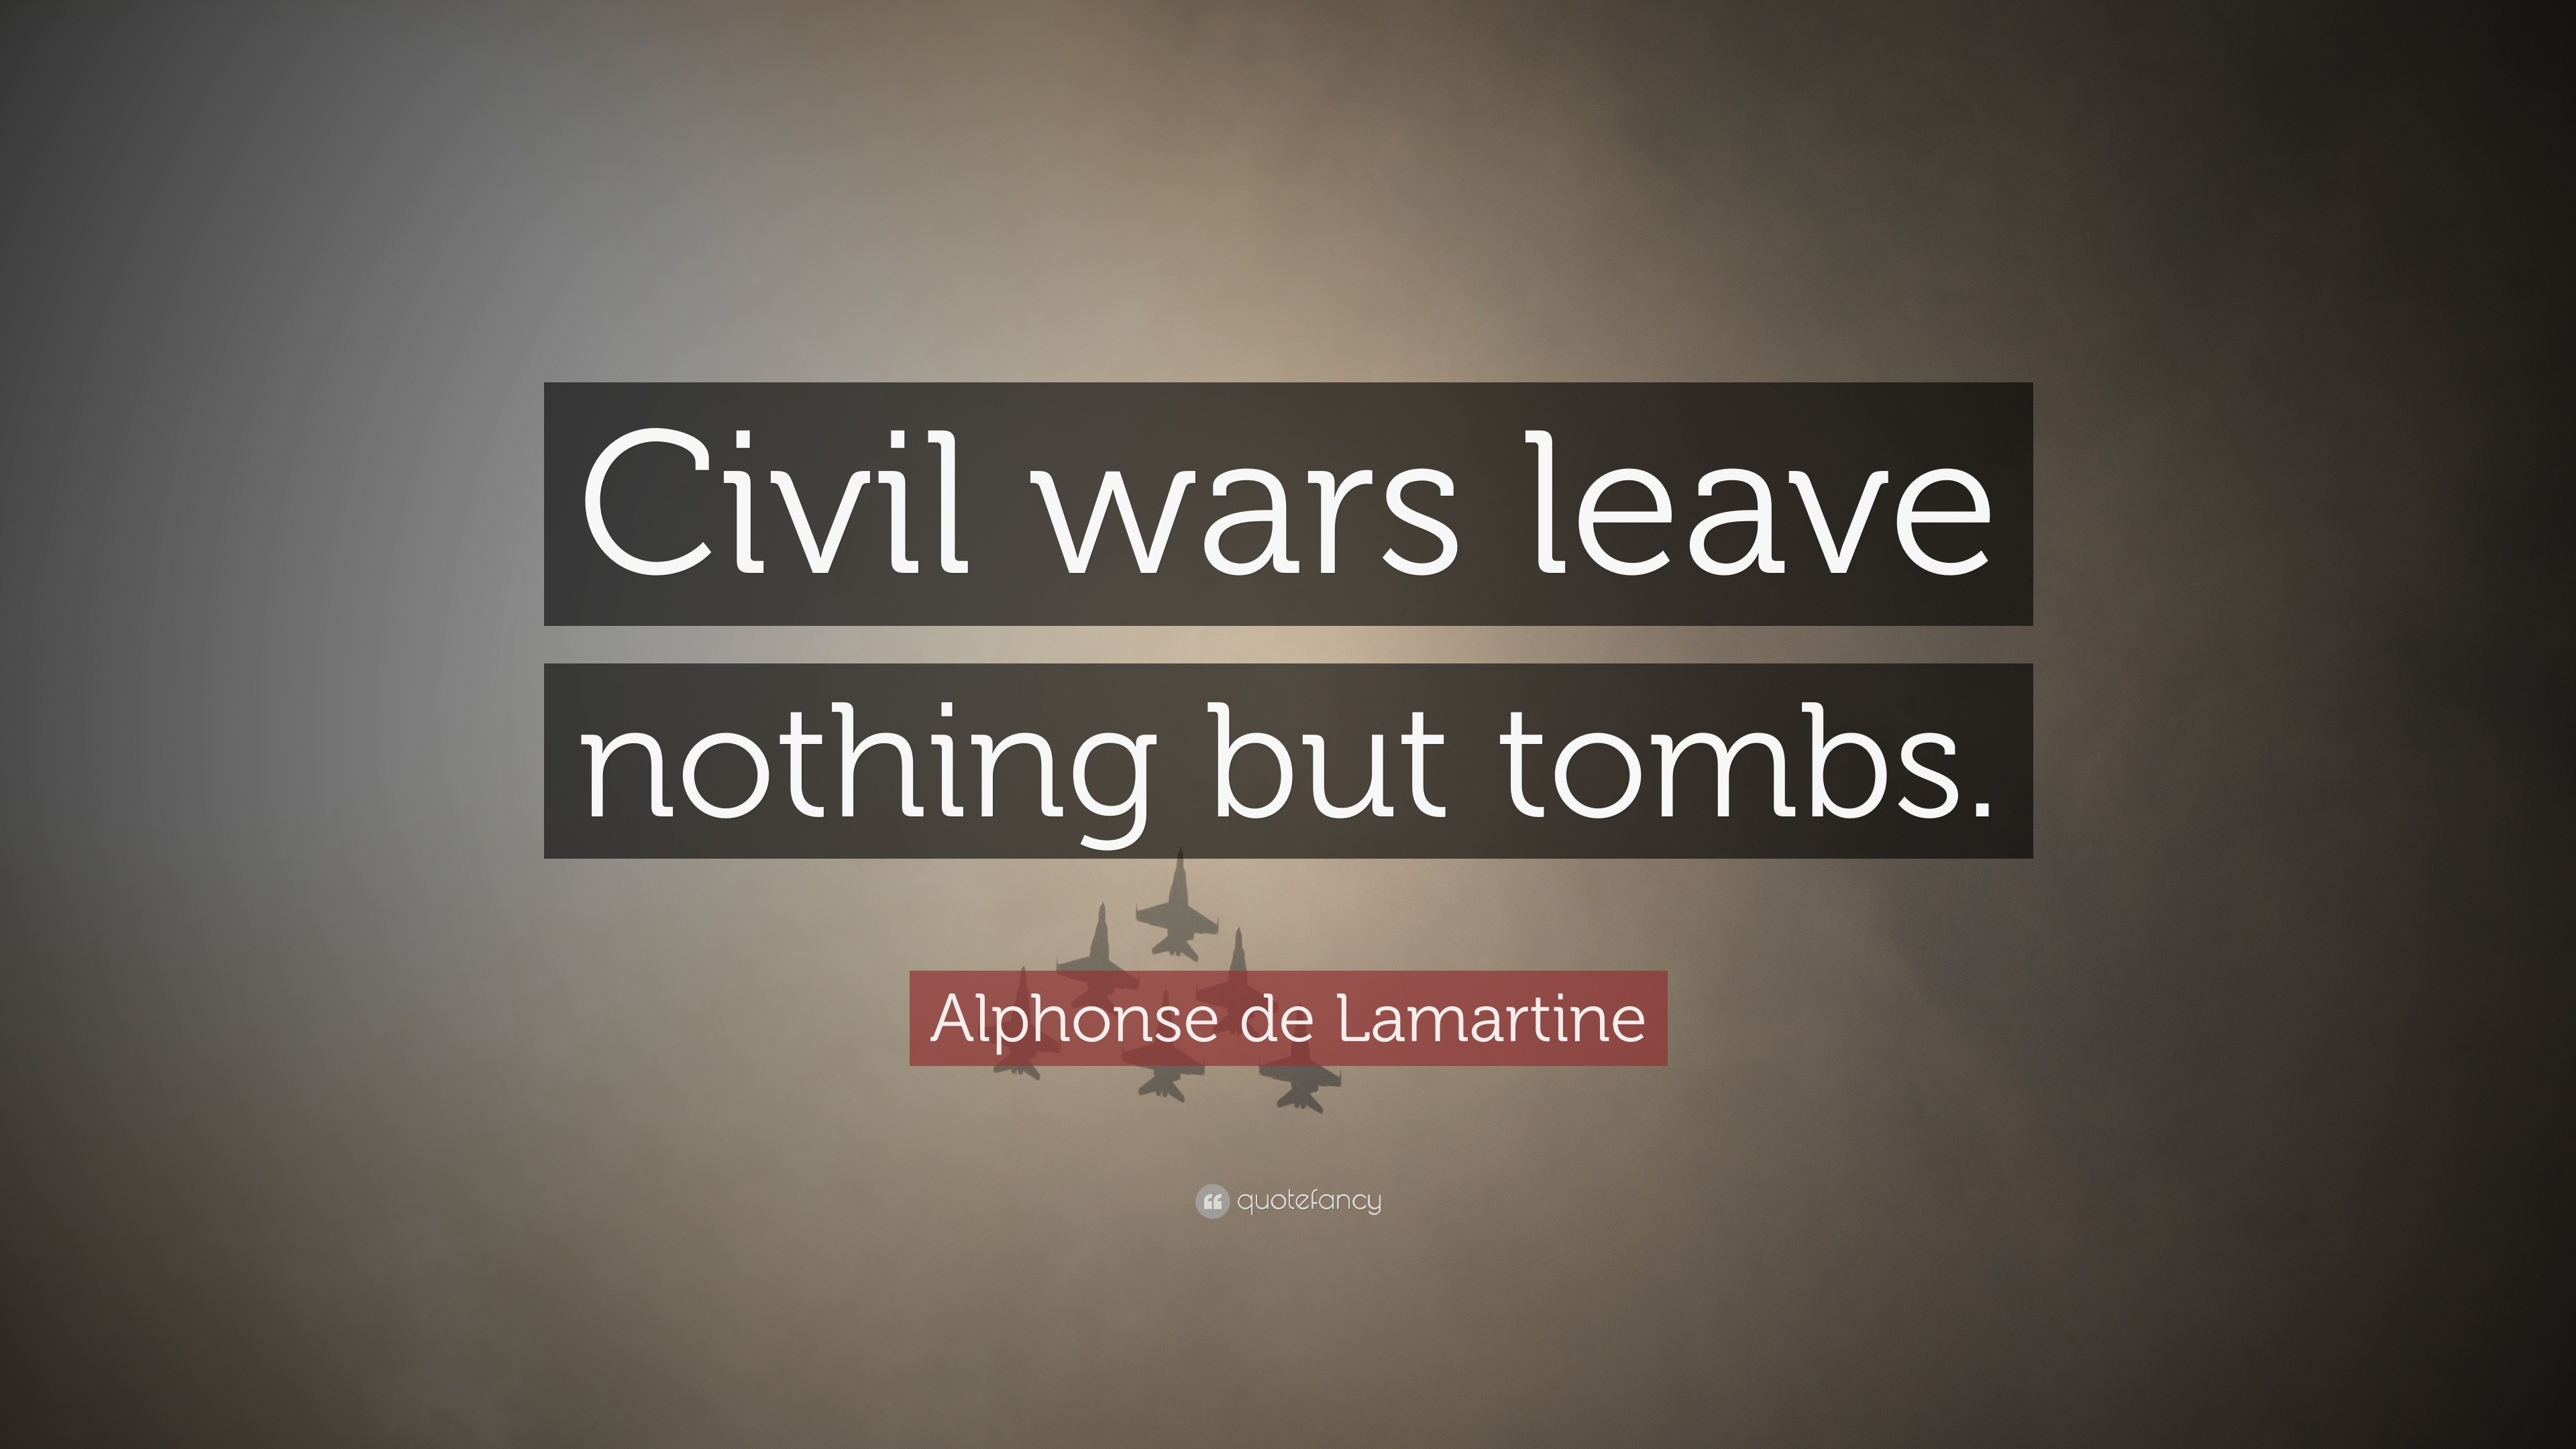 A Quotes For The Civil War